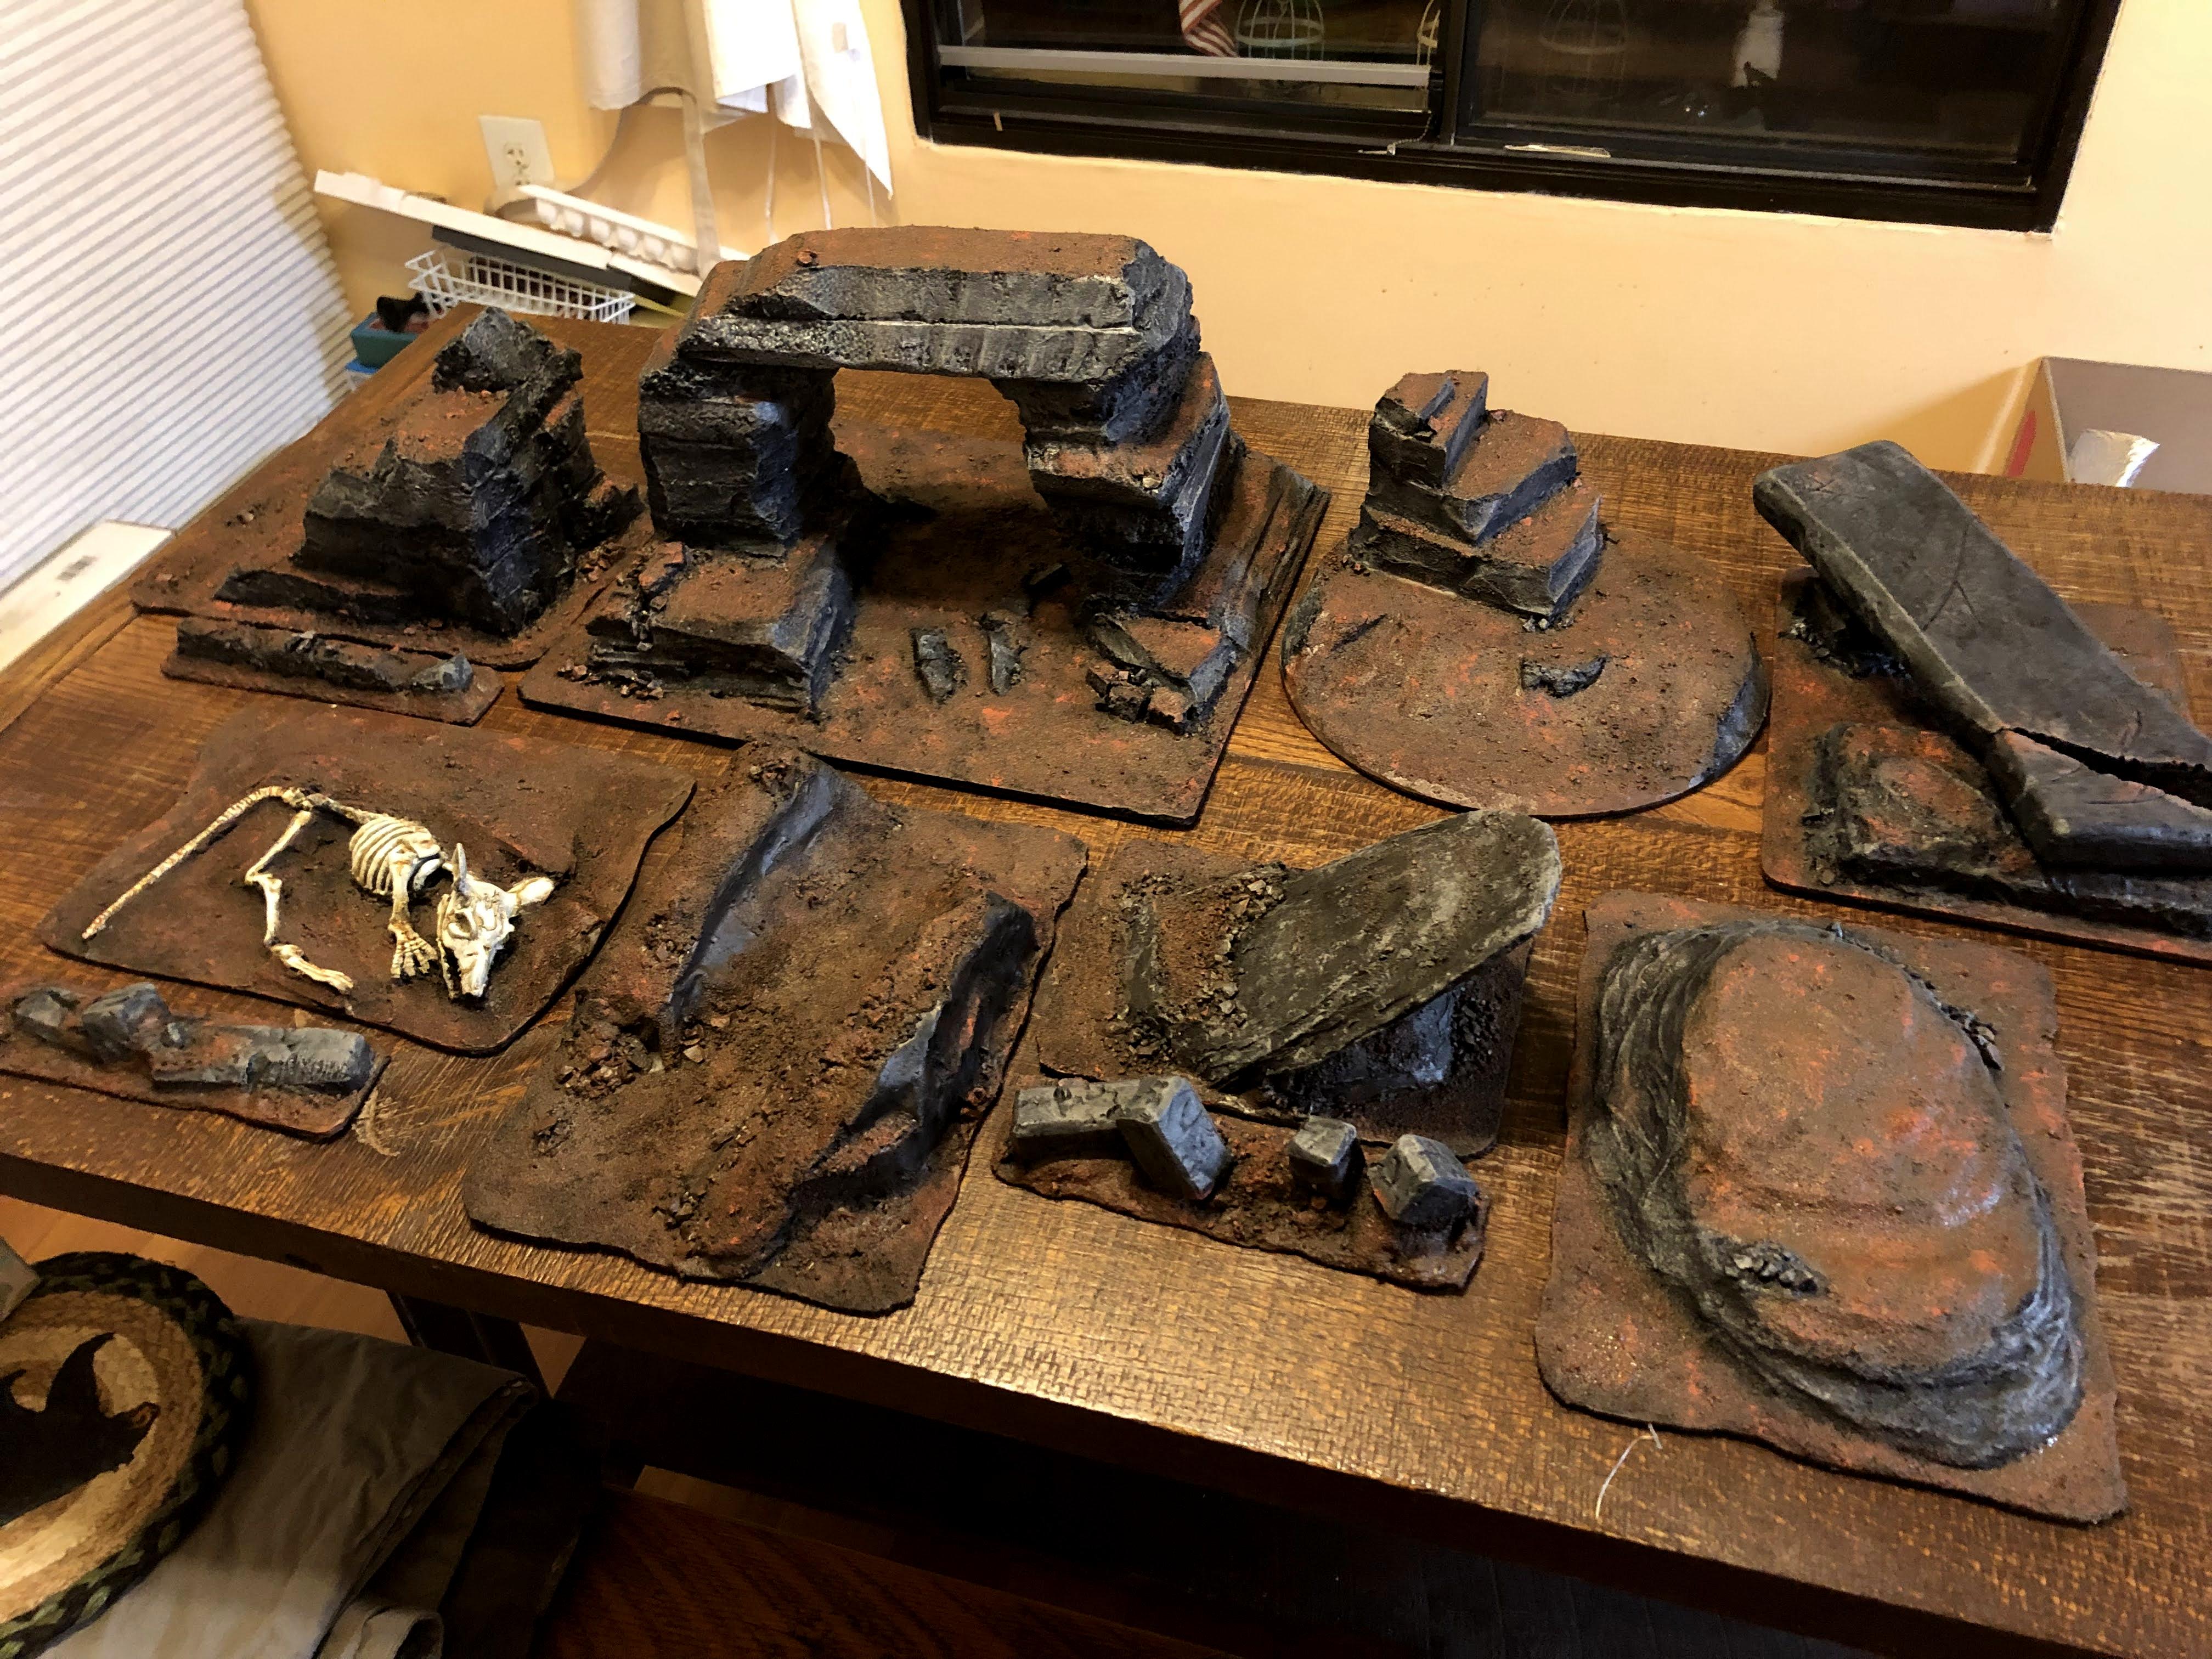 Badlands, Commissions, Display Boards, Do-it-yourself, Hills, Outcrops, Rock, Terrain